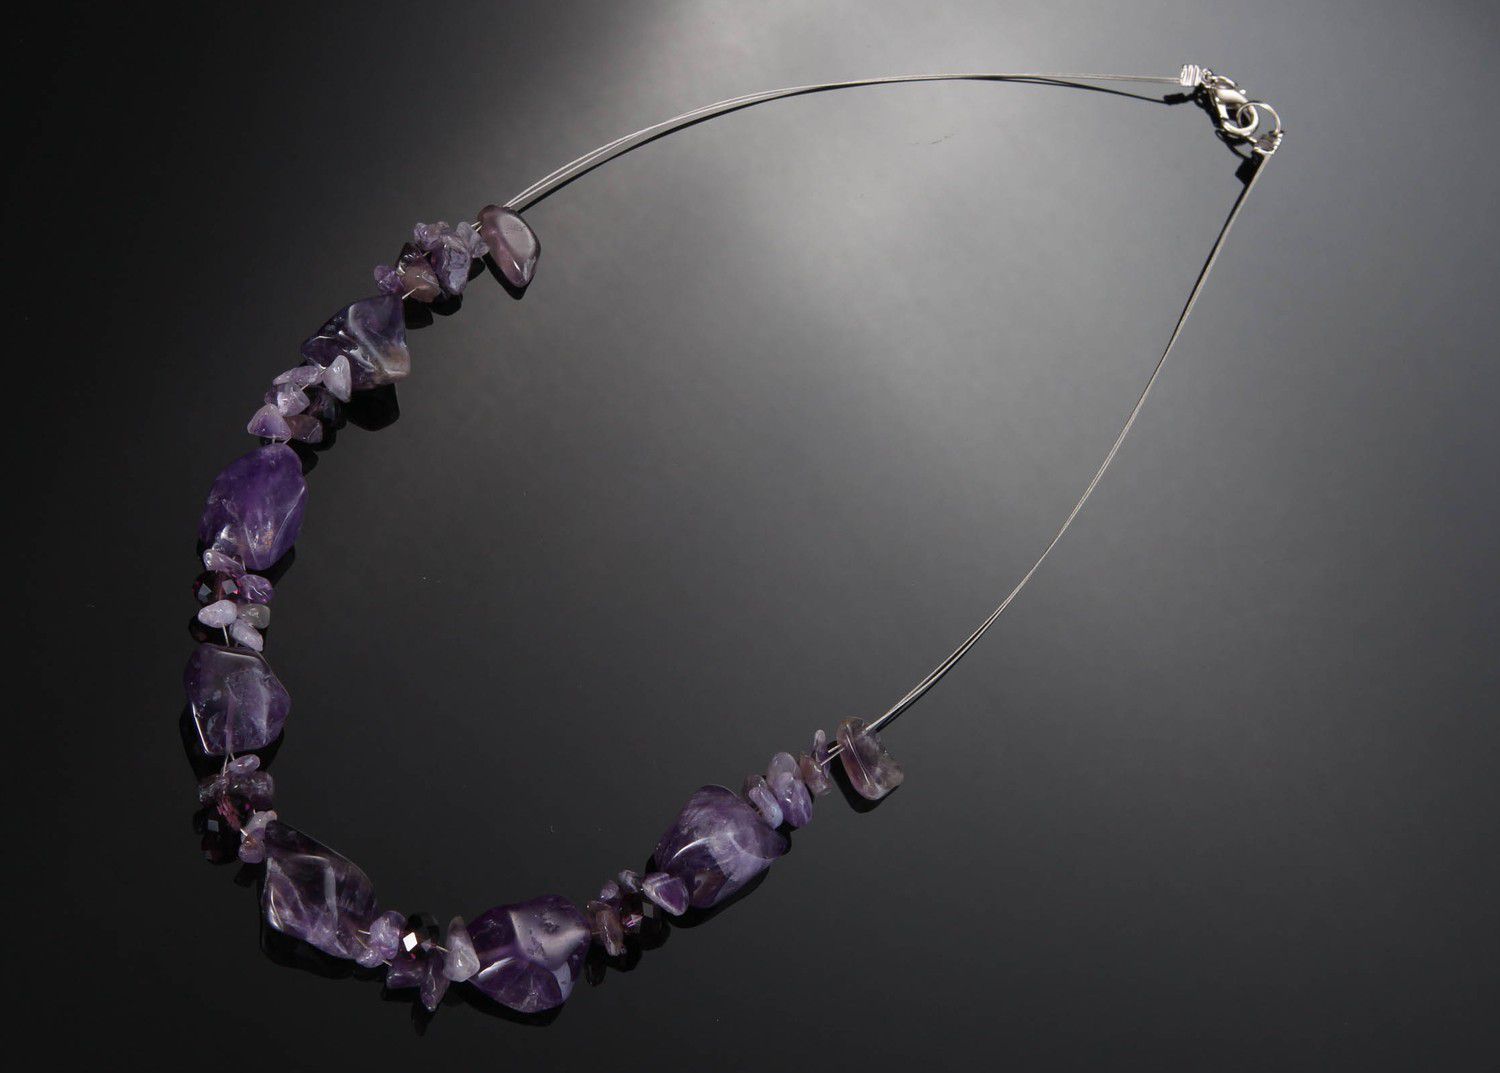 BUY Necklace with amethyst on a jewelry rope 1097749698 - HANDMADE ...